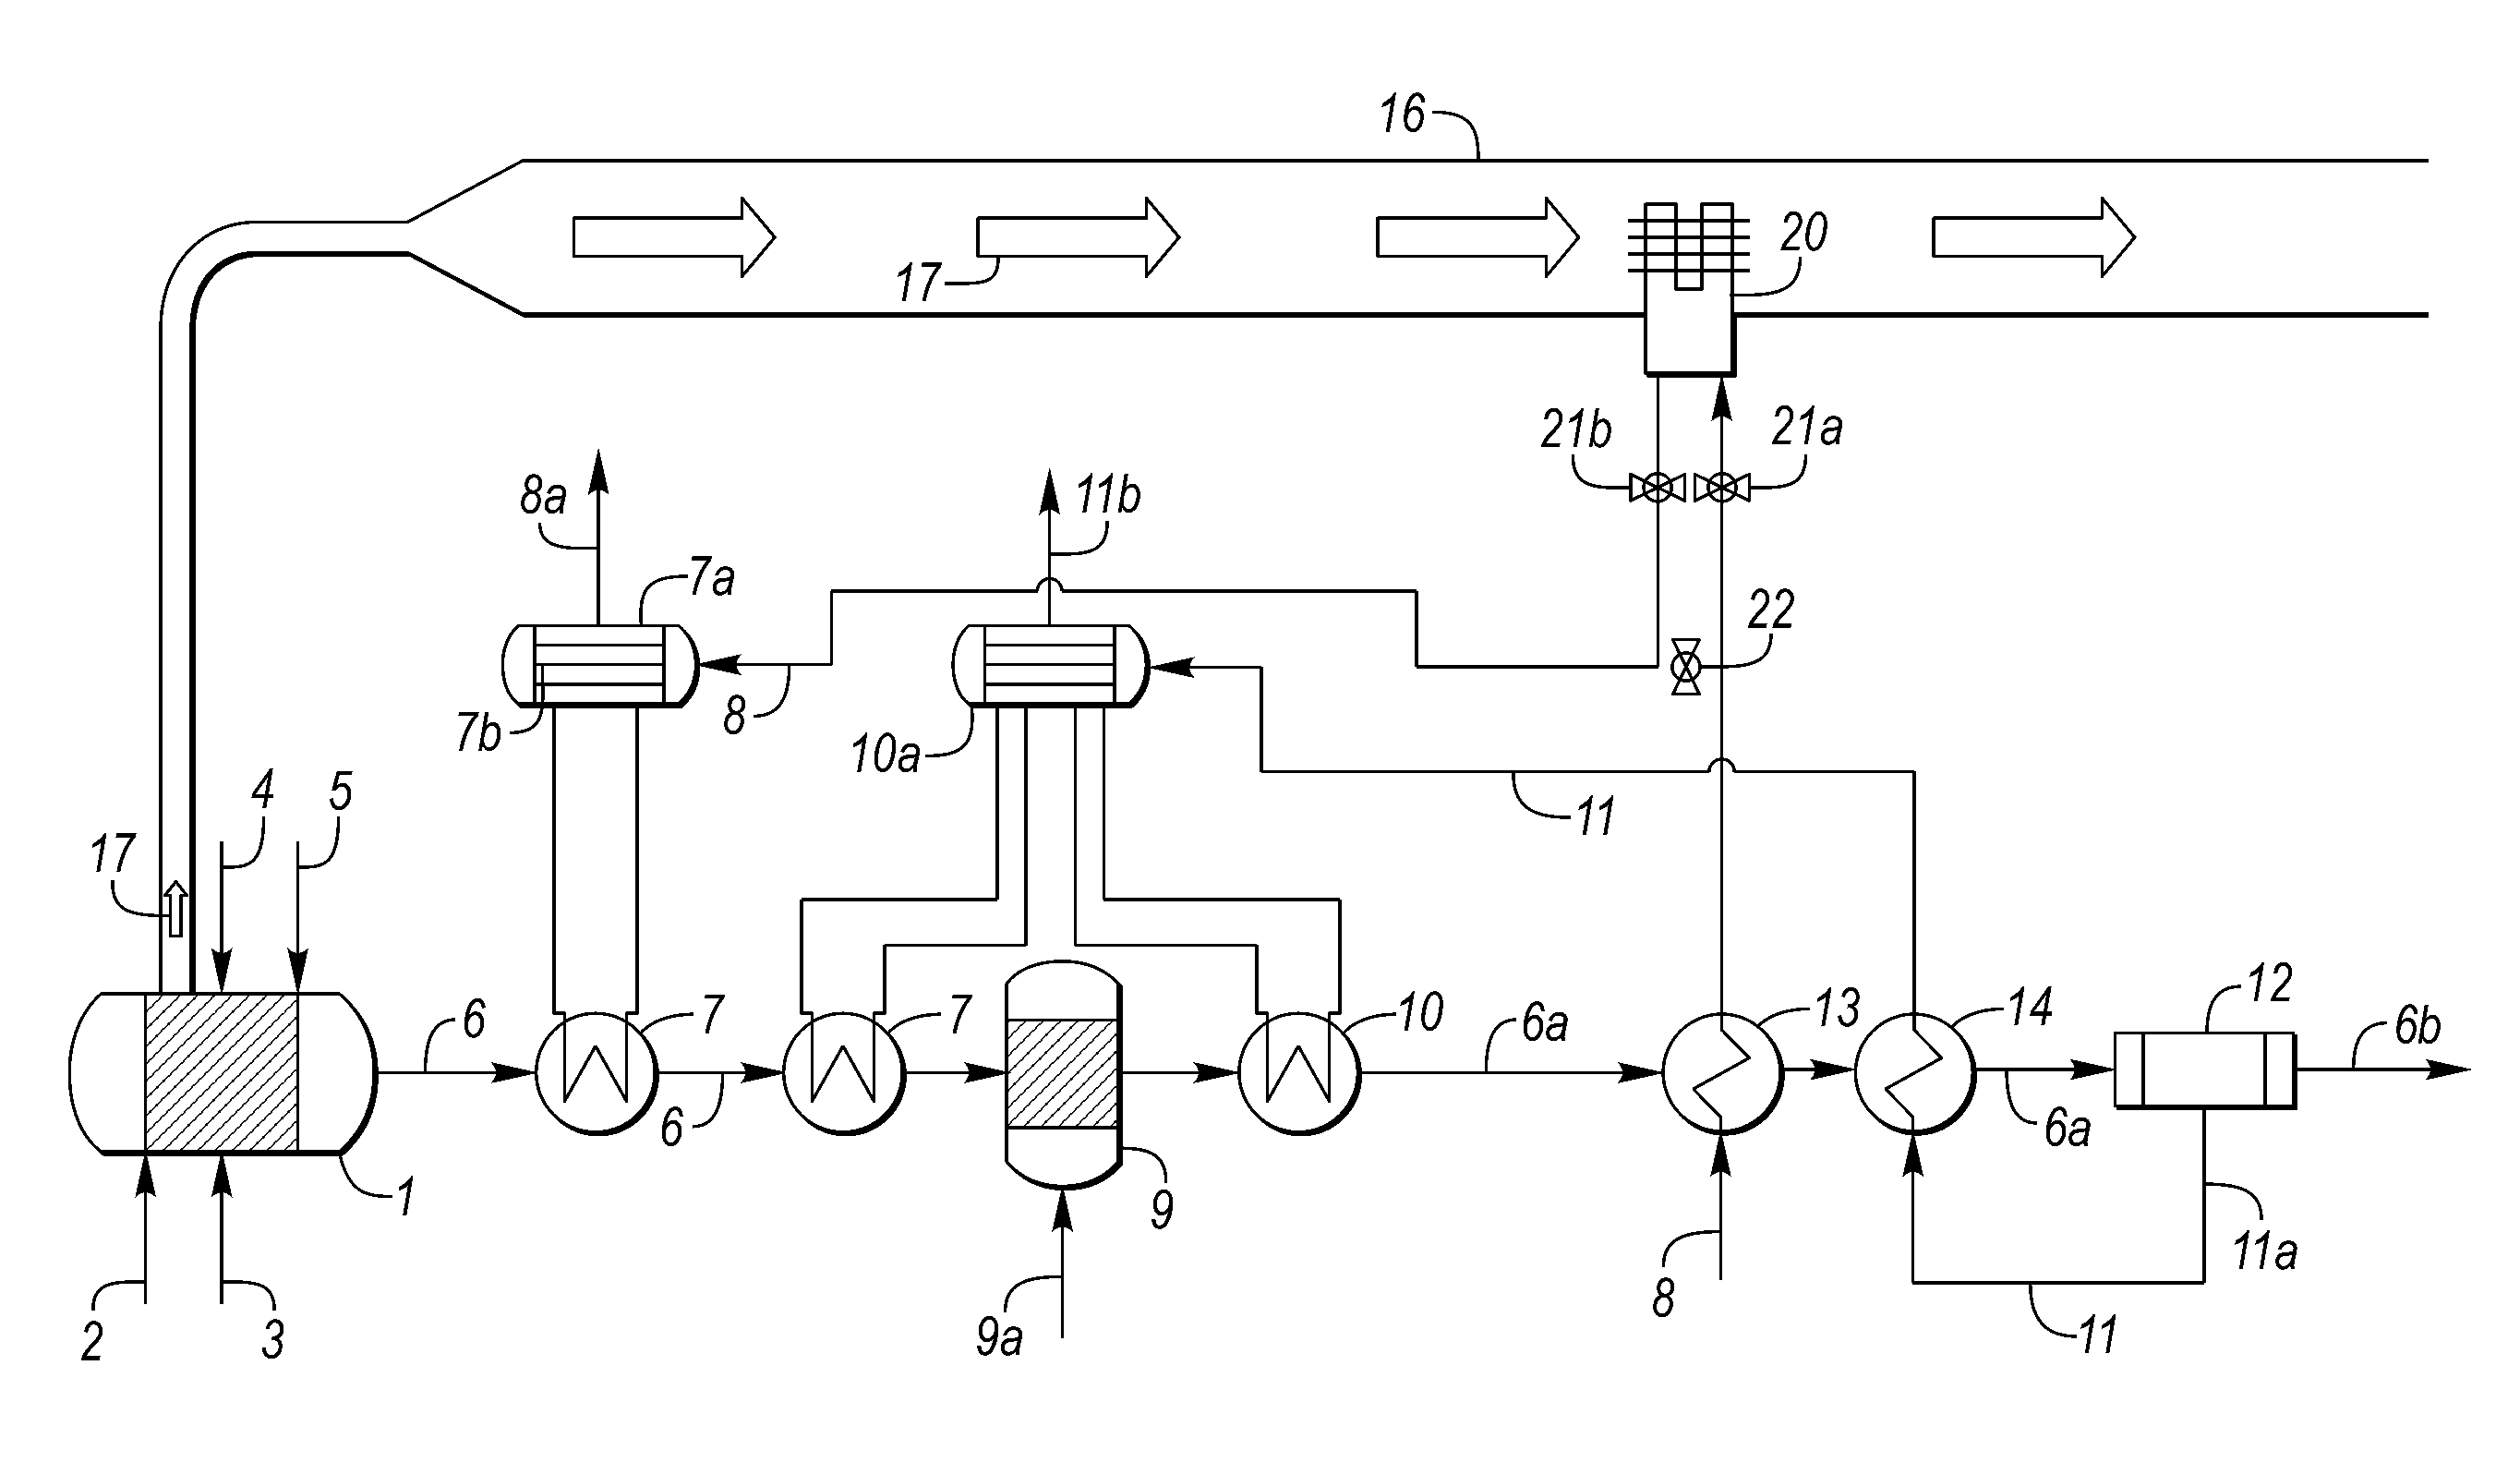 Method and device for producing process vapor and boiler feed steam in a heatable reforming reactor for producing synthesis gas